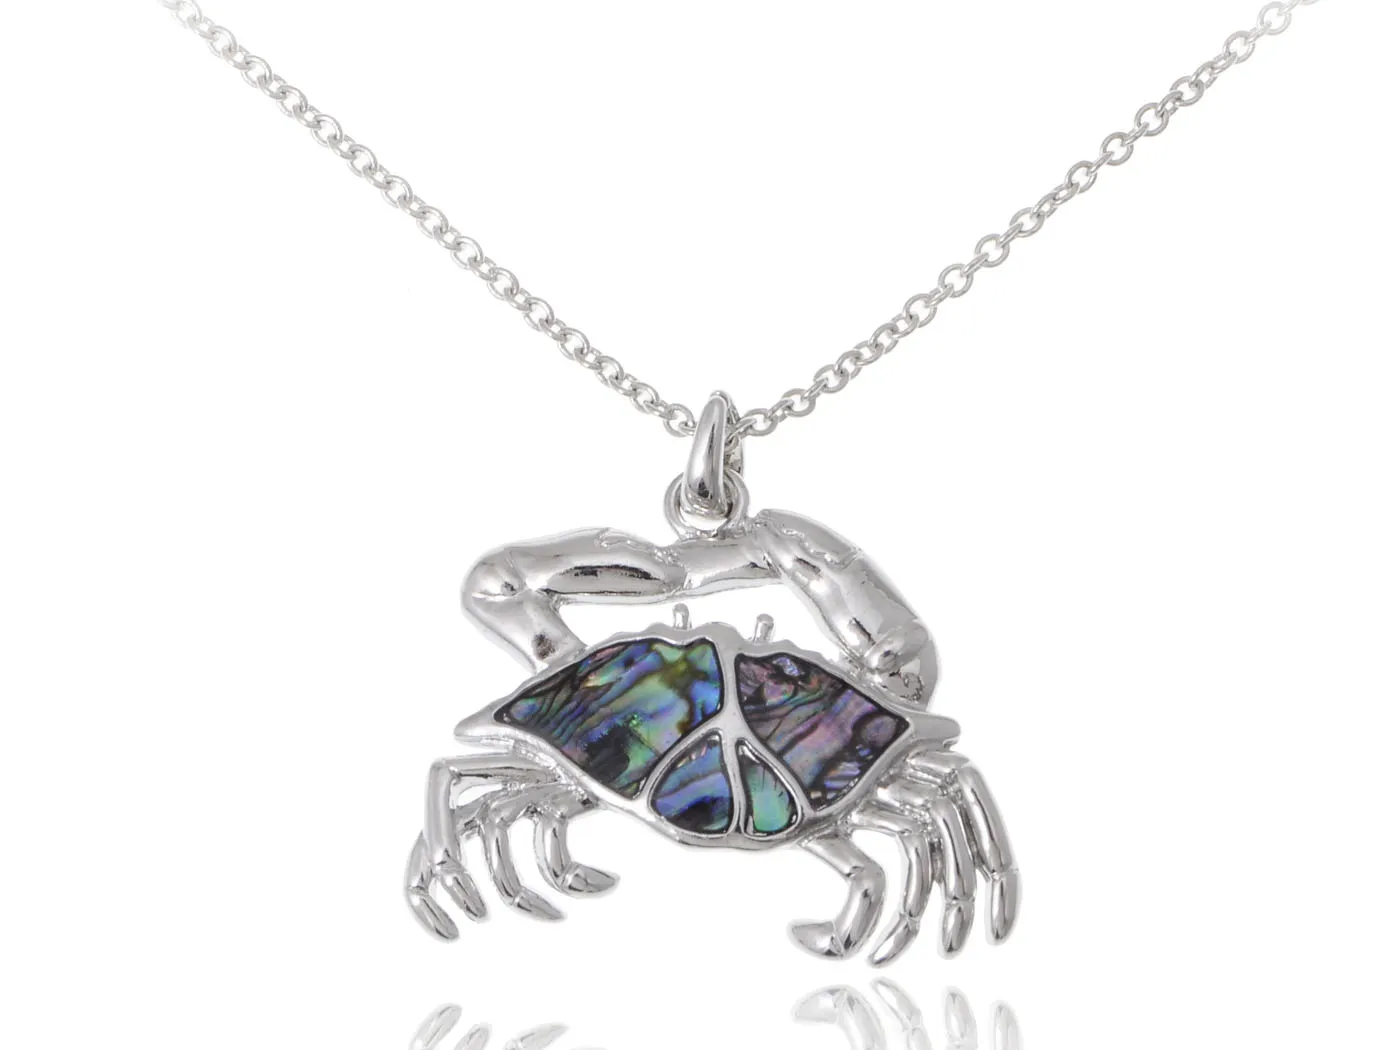 

Ocean Crab Pendant Silvery Tone Faux Abalone Shell Small Walking Necklace For Women Gift